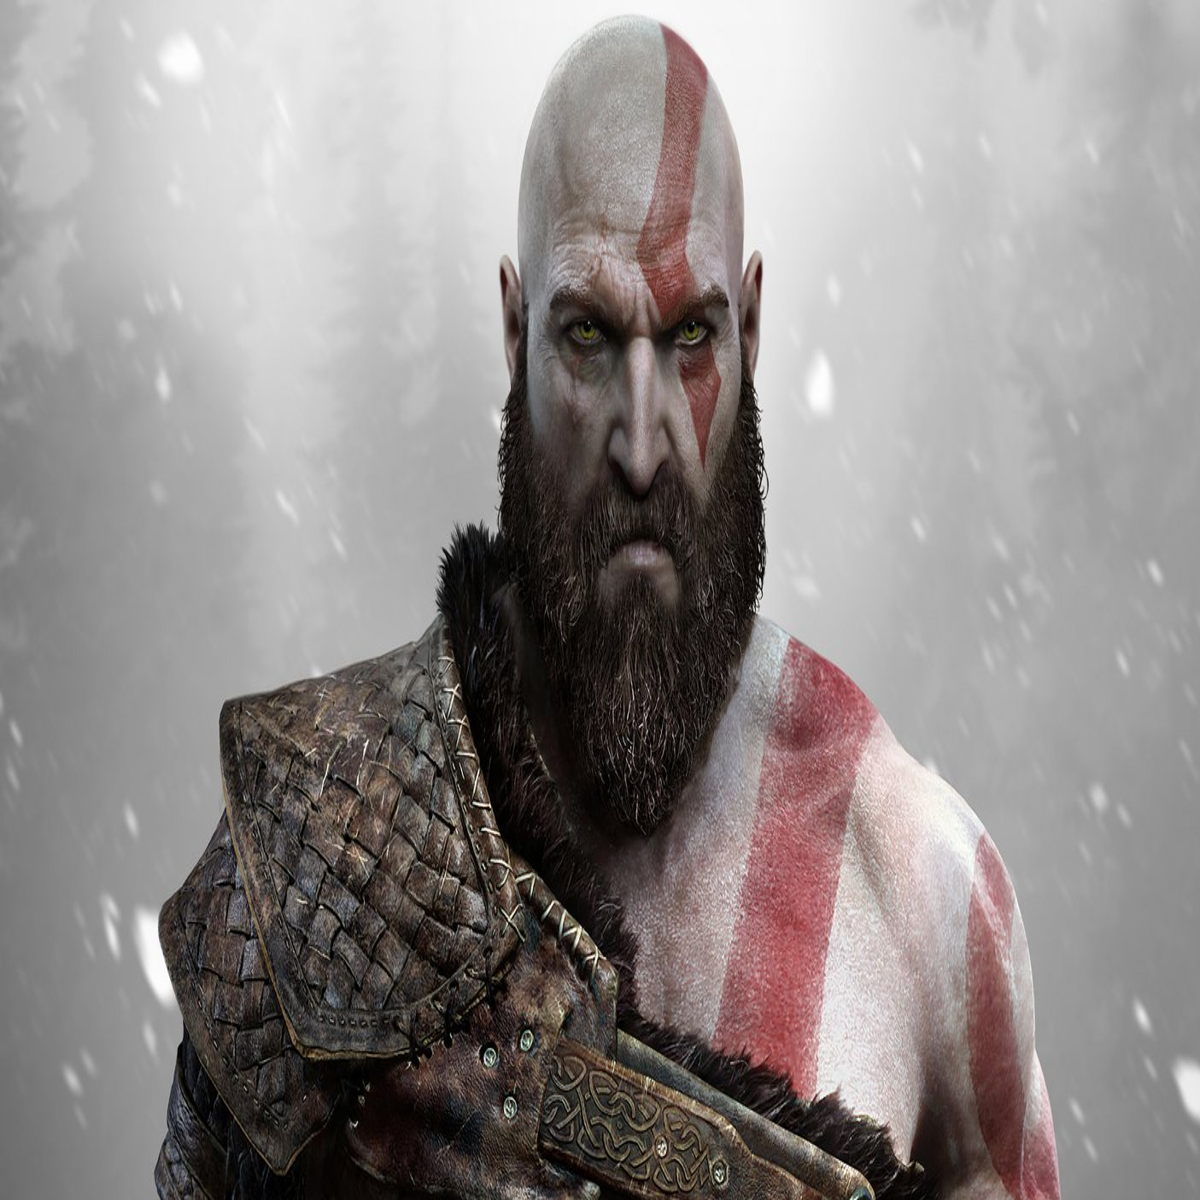 God of War (for PlayStation 4) Review